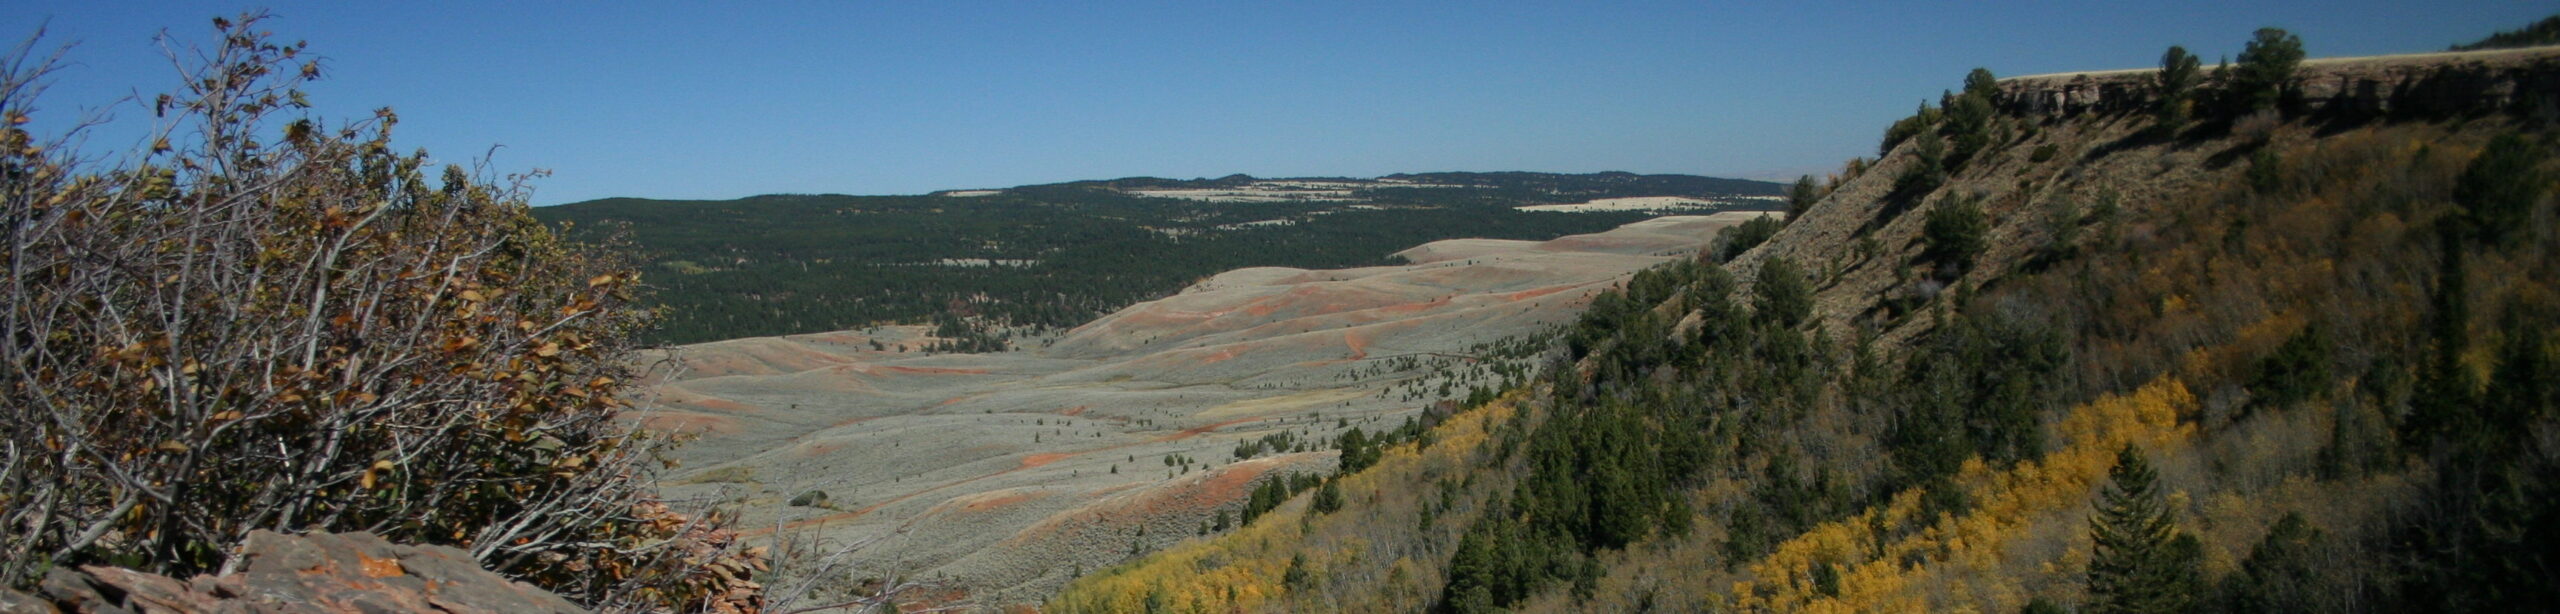 This is an image of the outdoors in Casper Wyoming where ASTA-USA provides professional translation services.